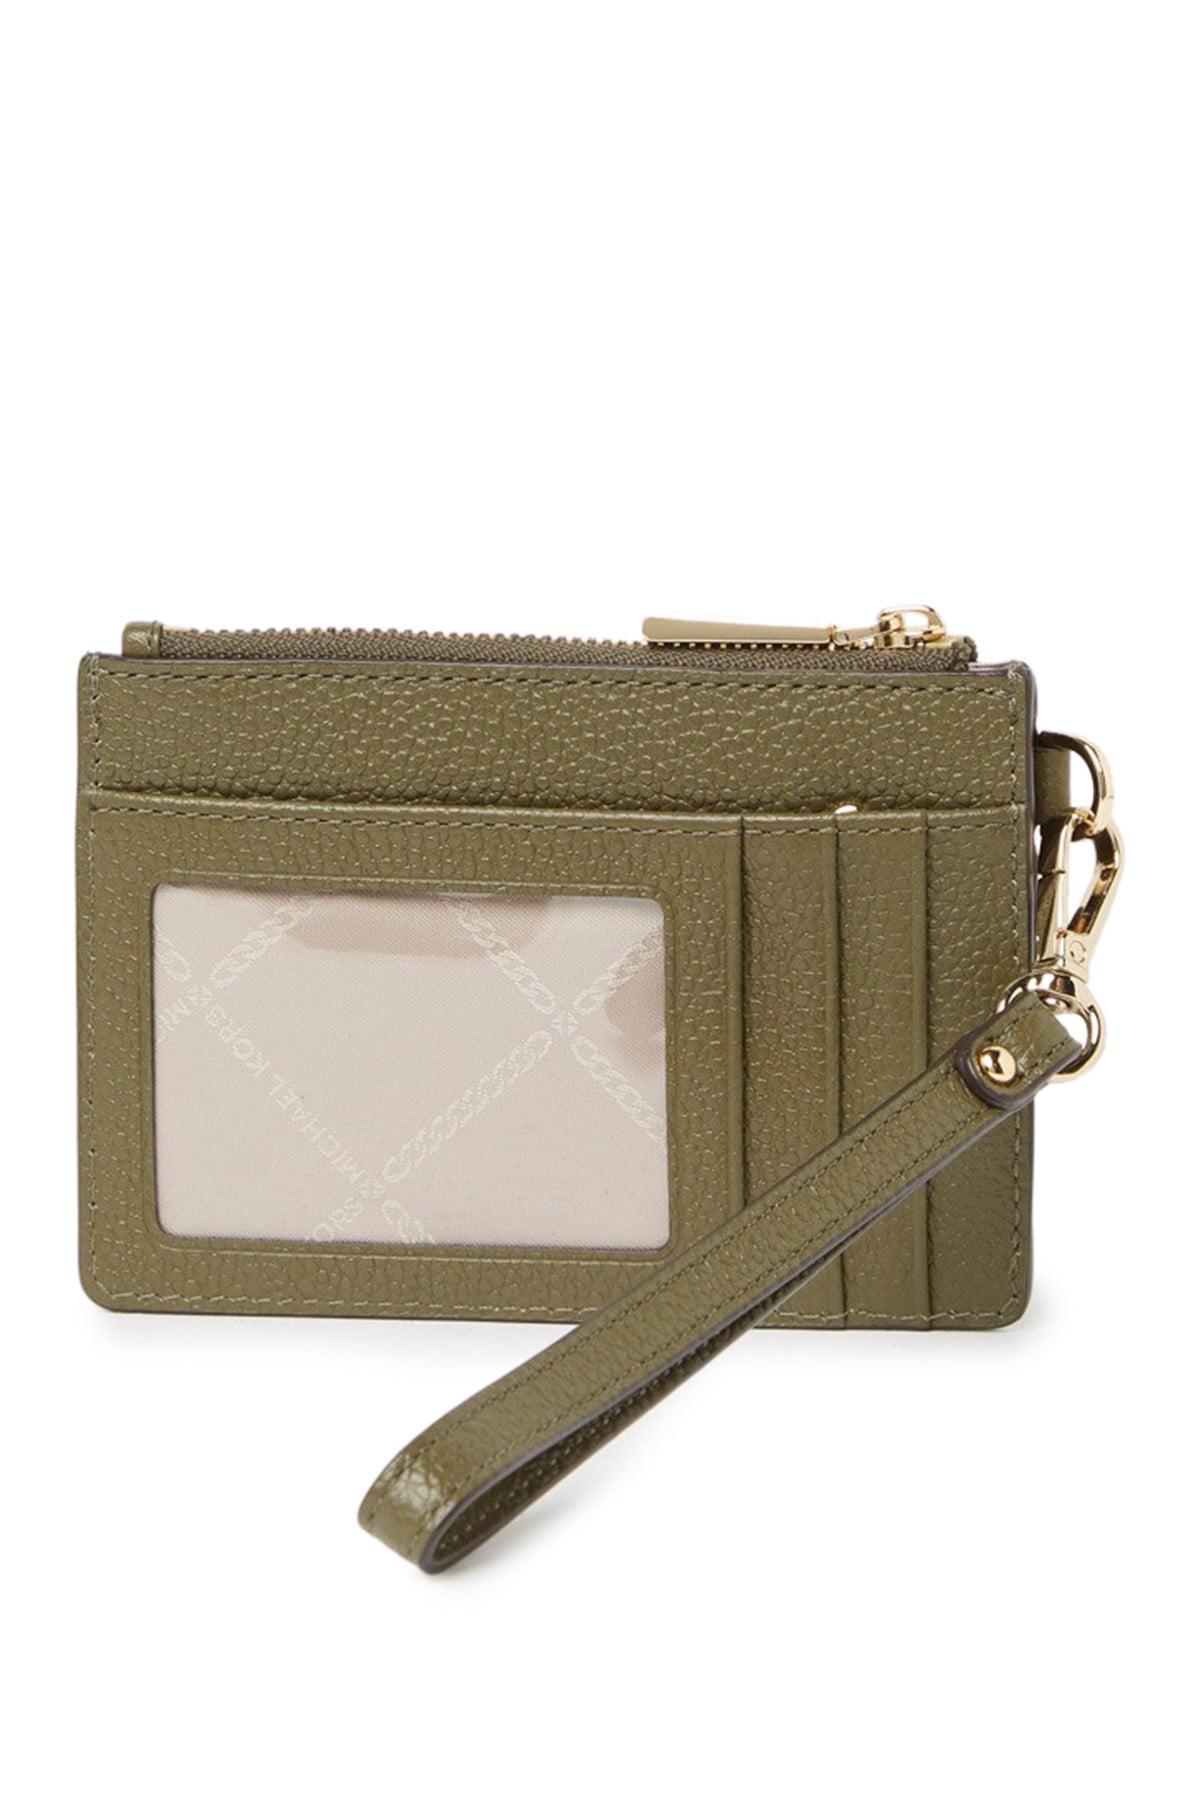 Michael Kors Michael Mercer Pebble Leather Coin Purse in Olive (Green) -  Lyst